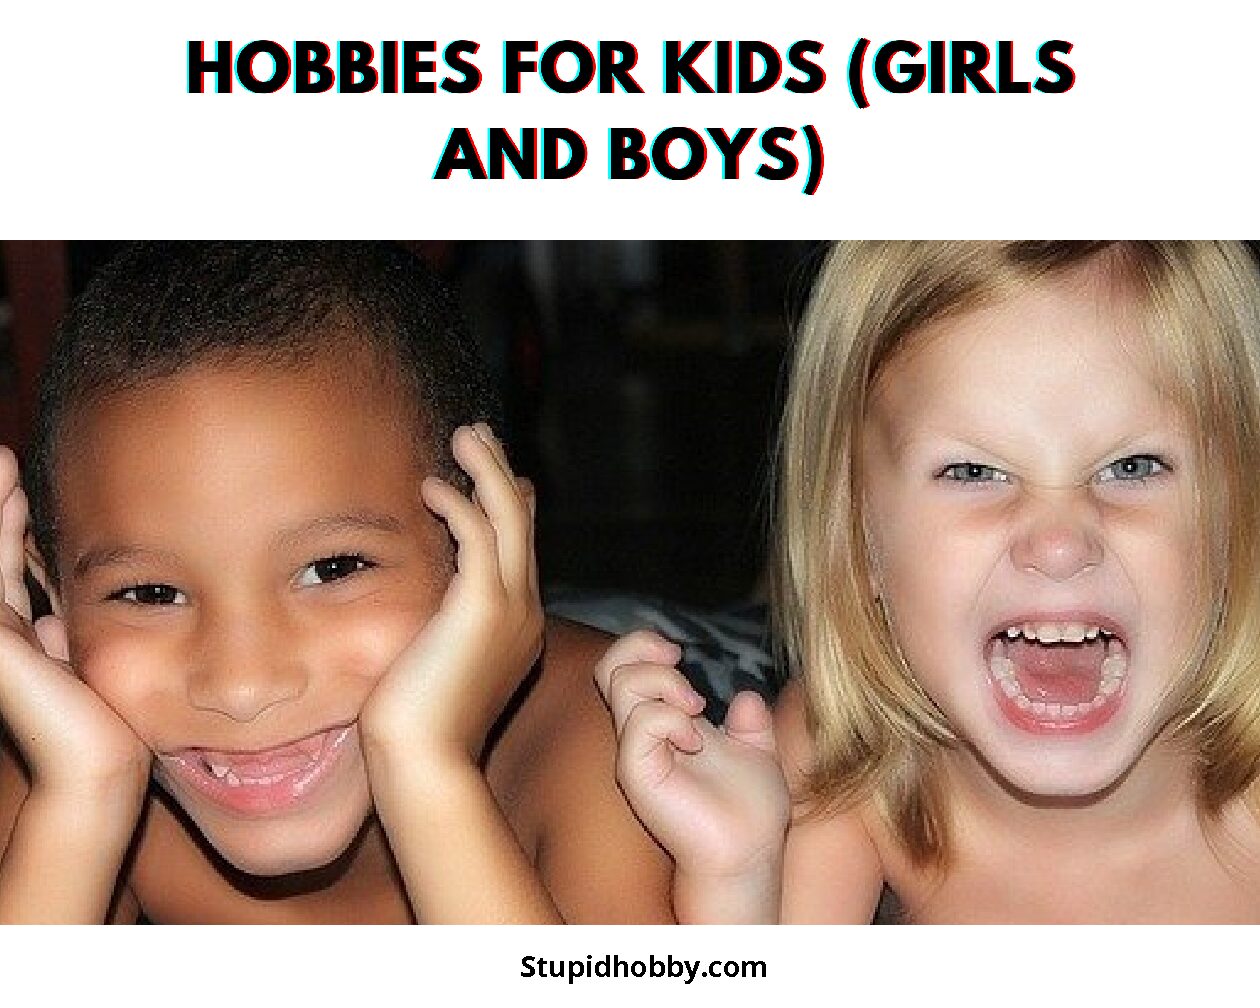 List of Hobbies for Kids (Girls and Boys)